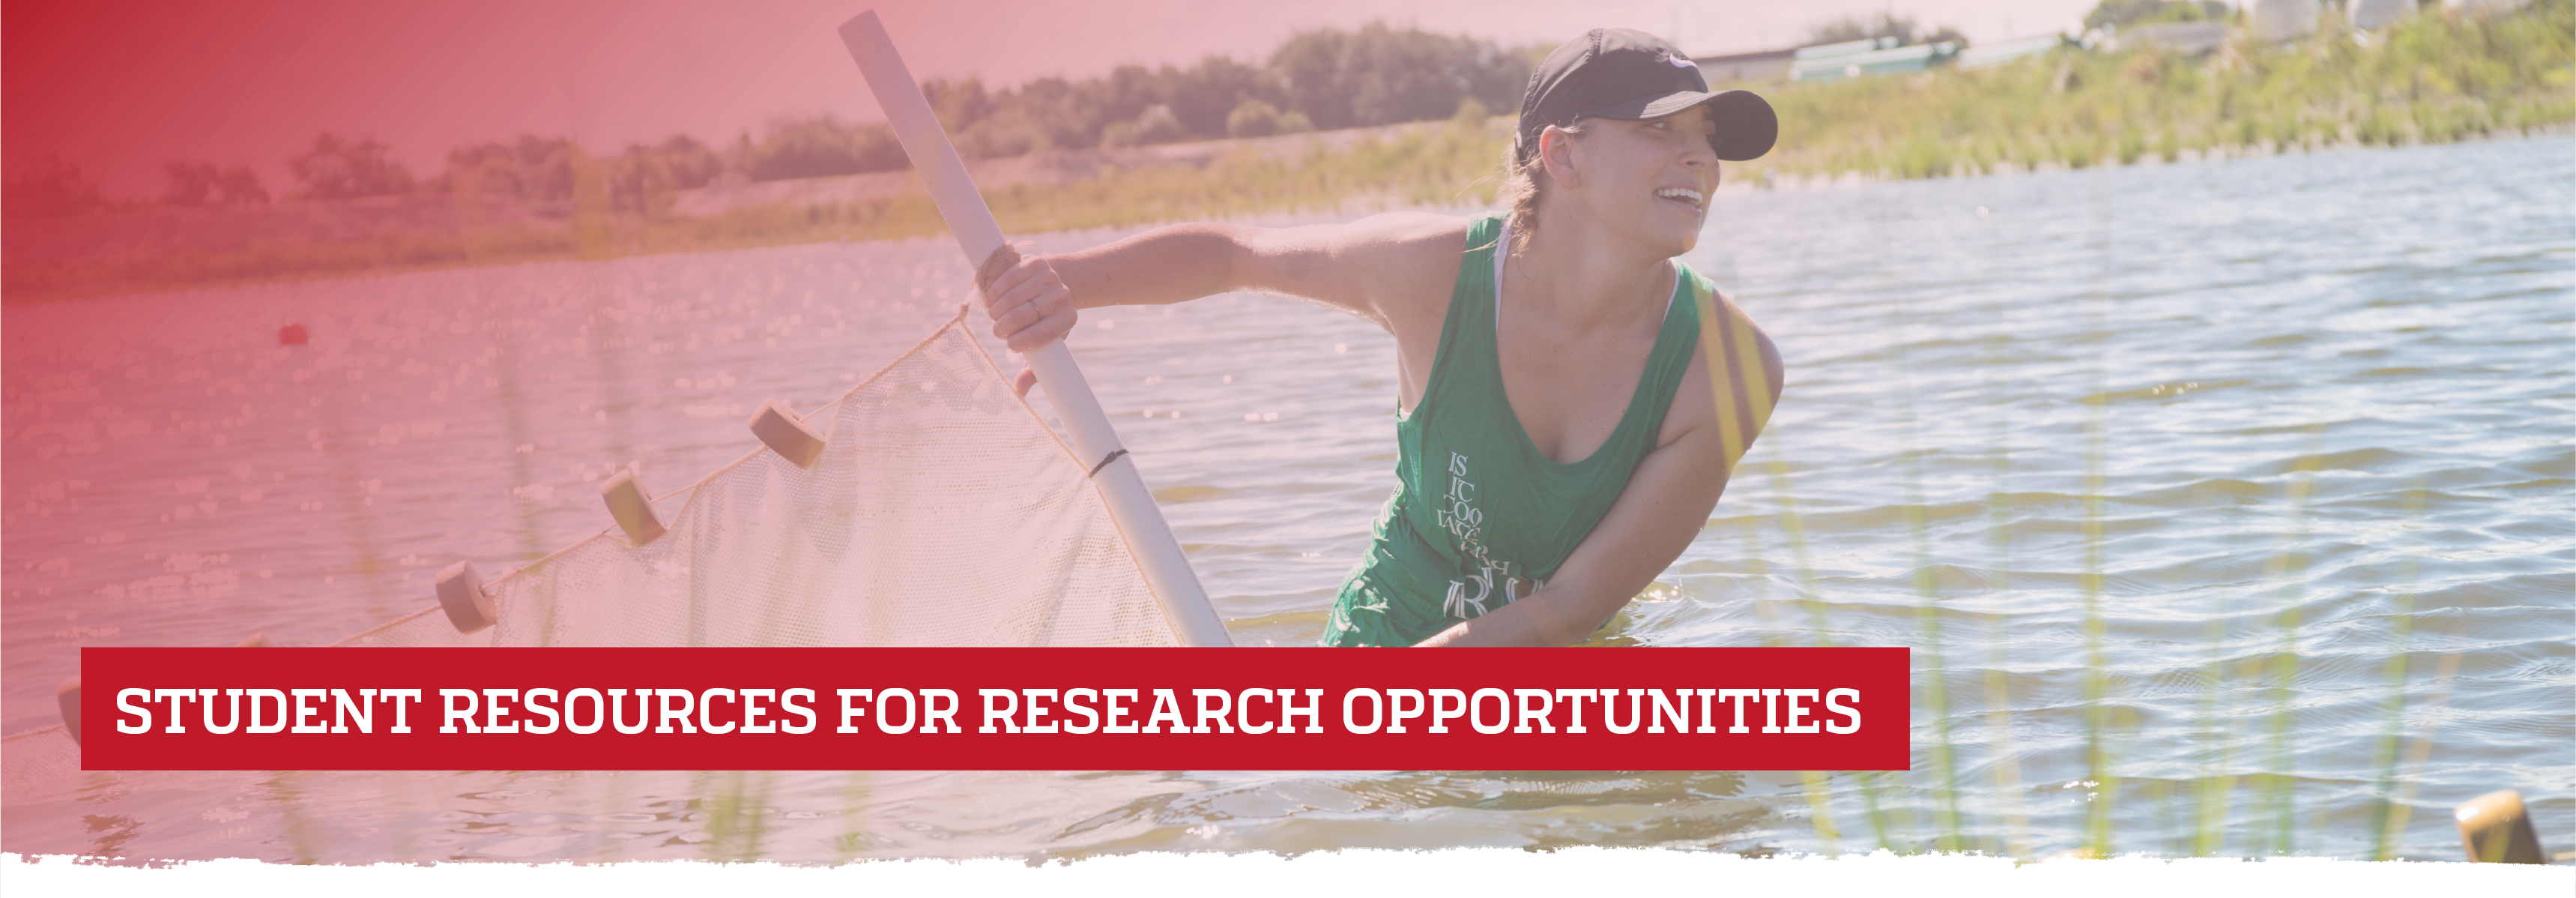 Female intern working in lake; Student Resources for Research Opportunities